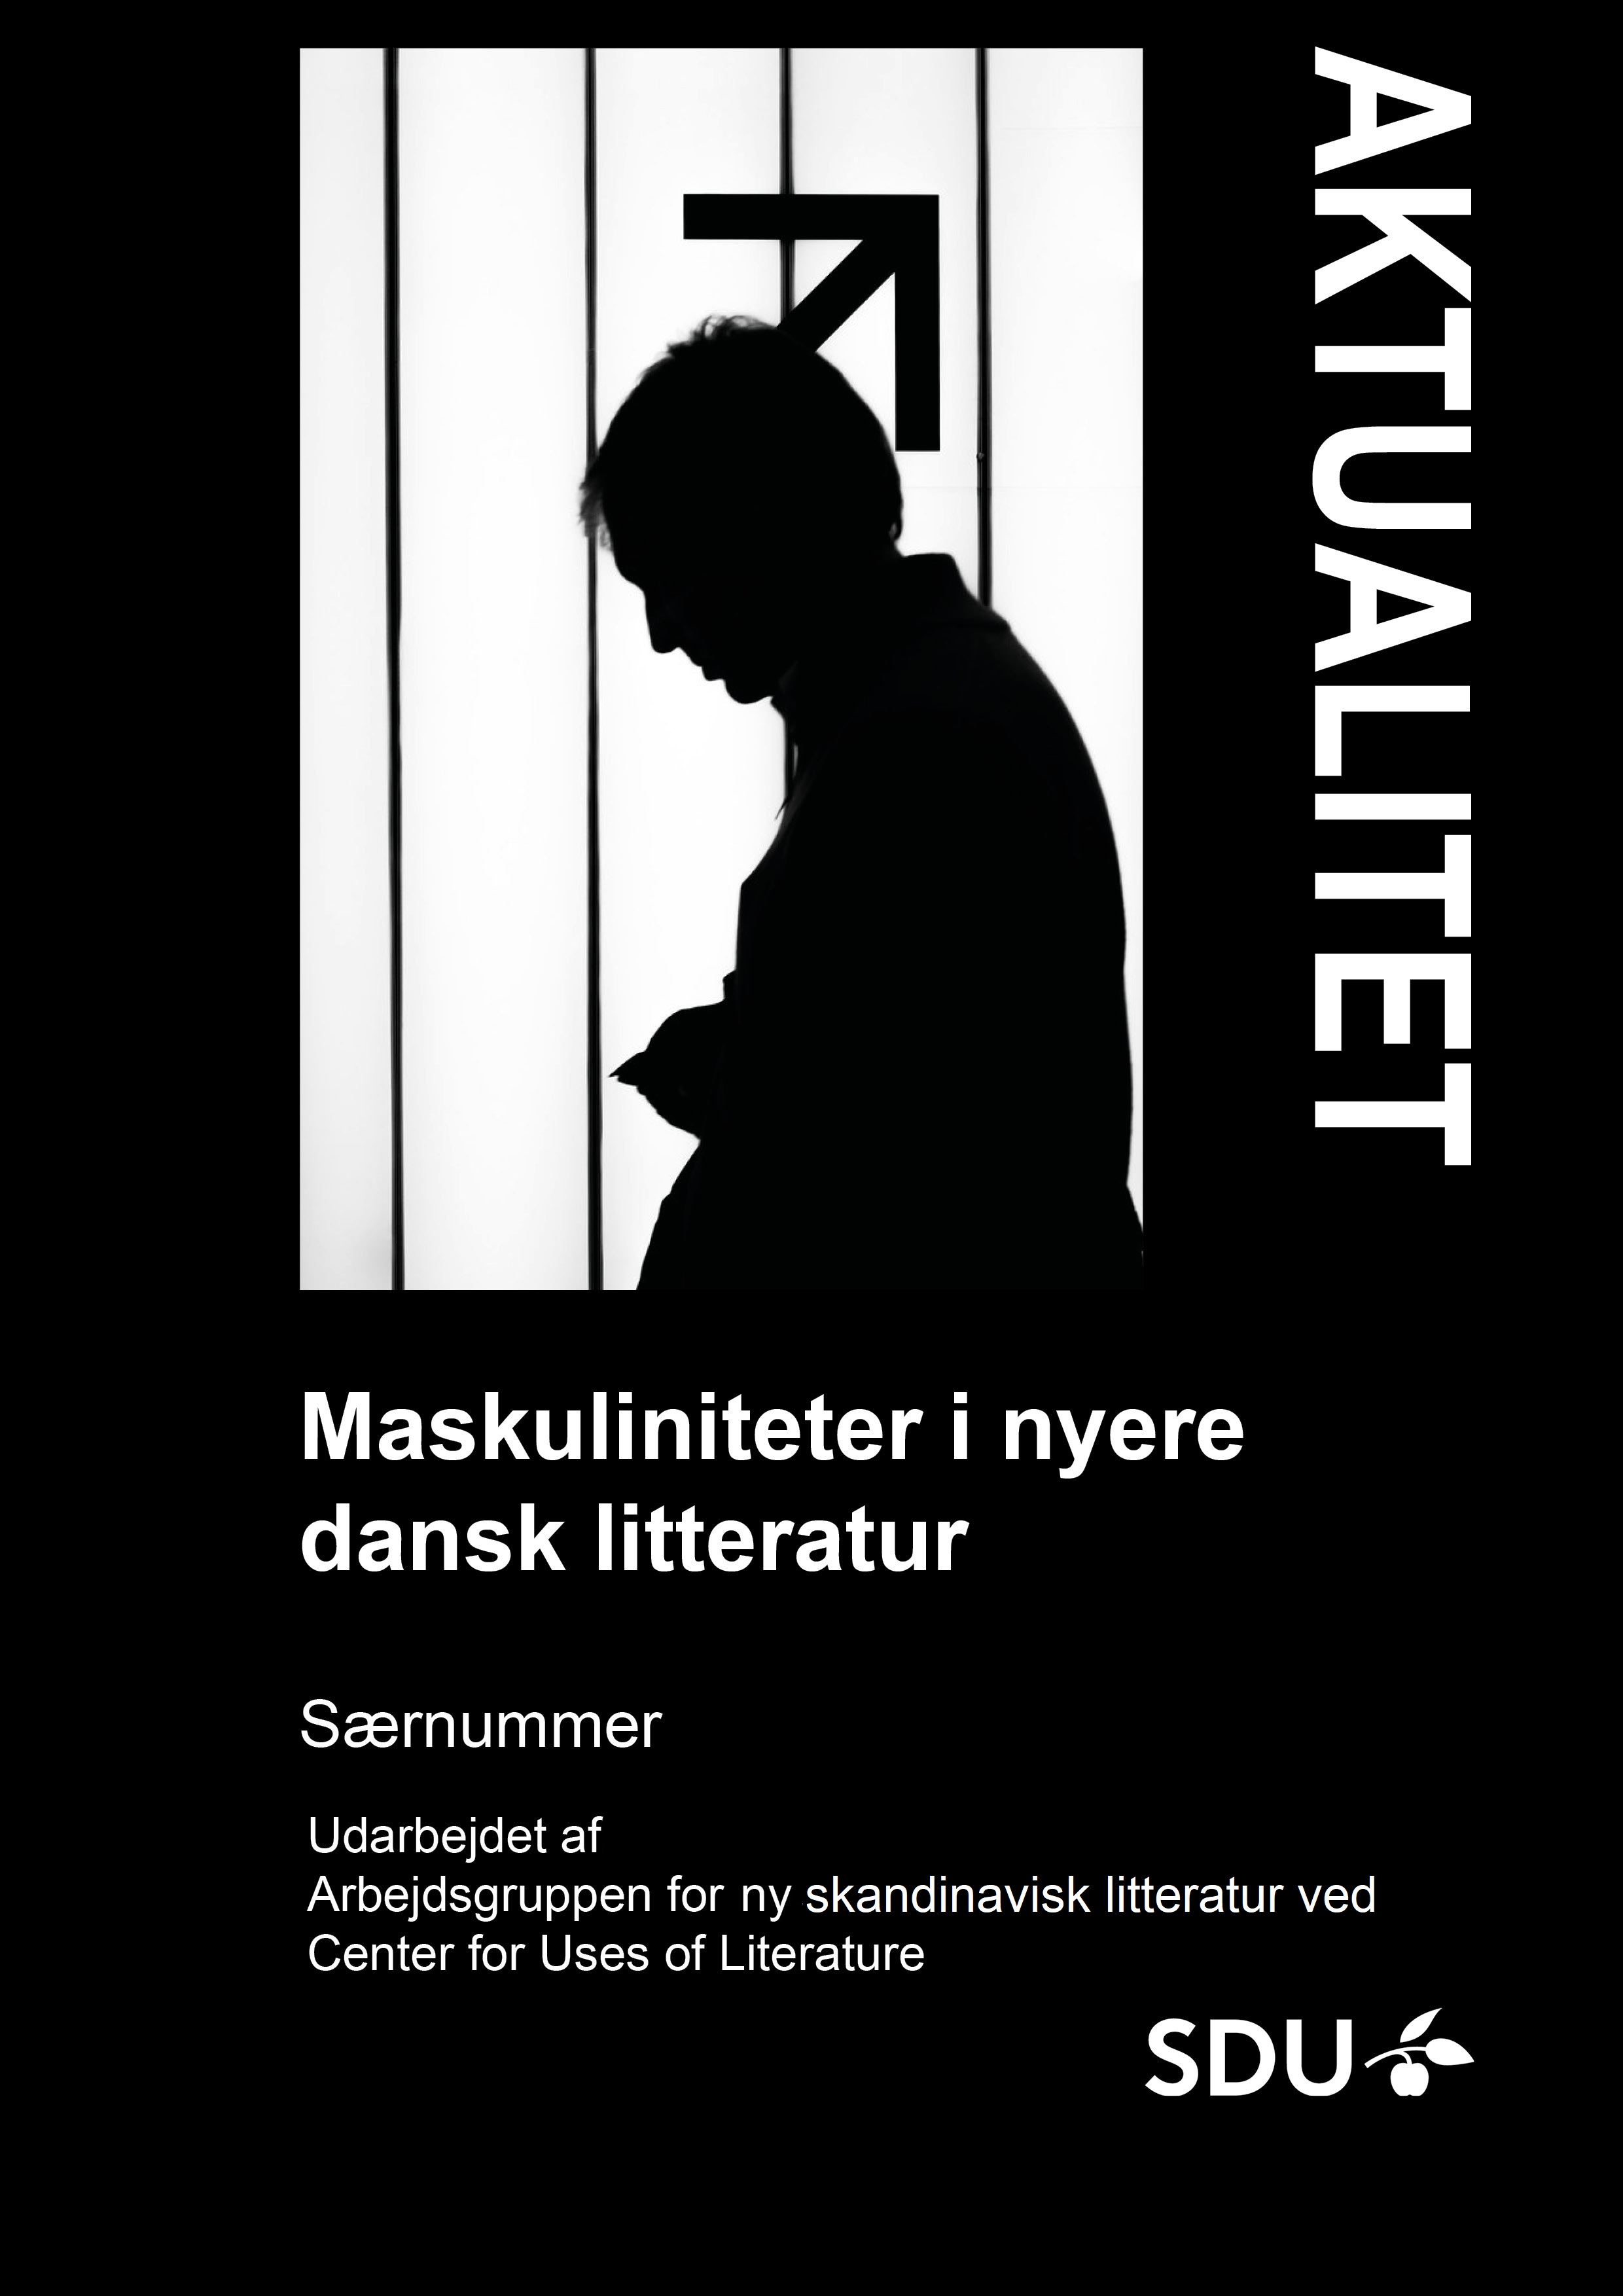 front cover of the journal Aktualitet 